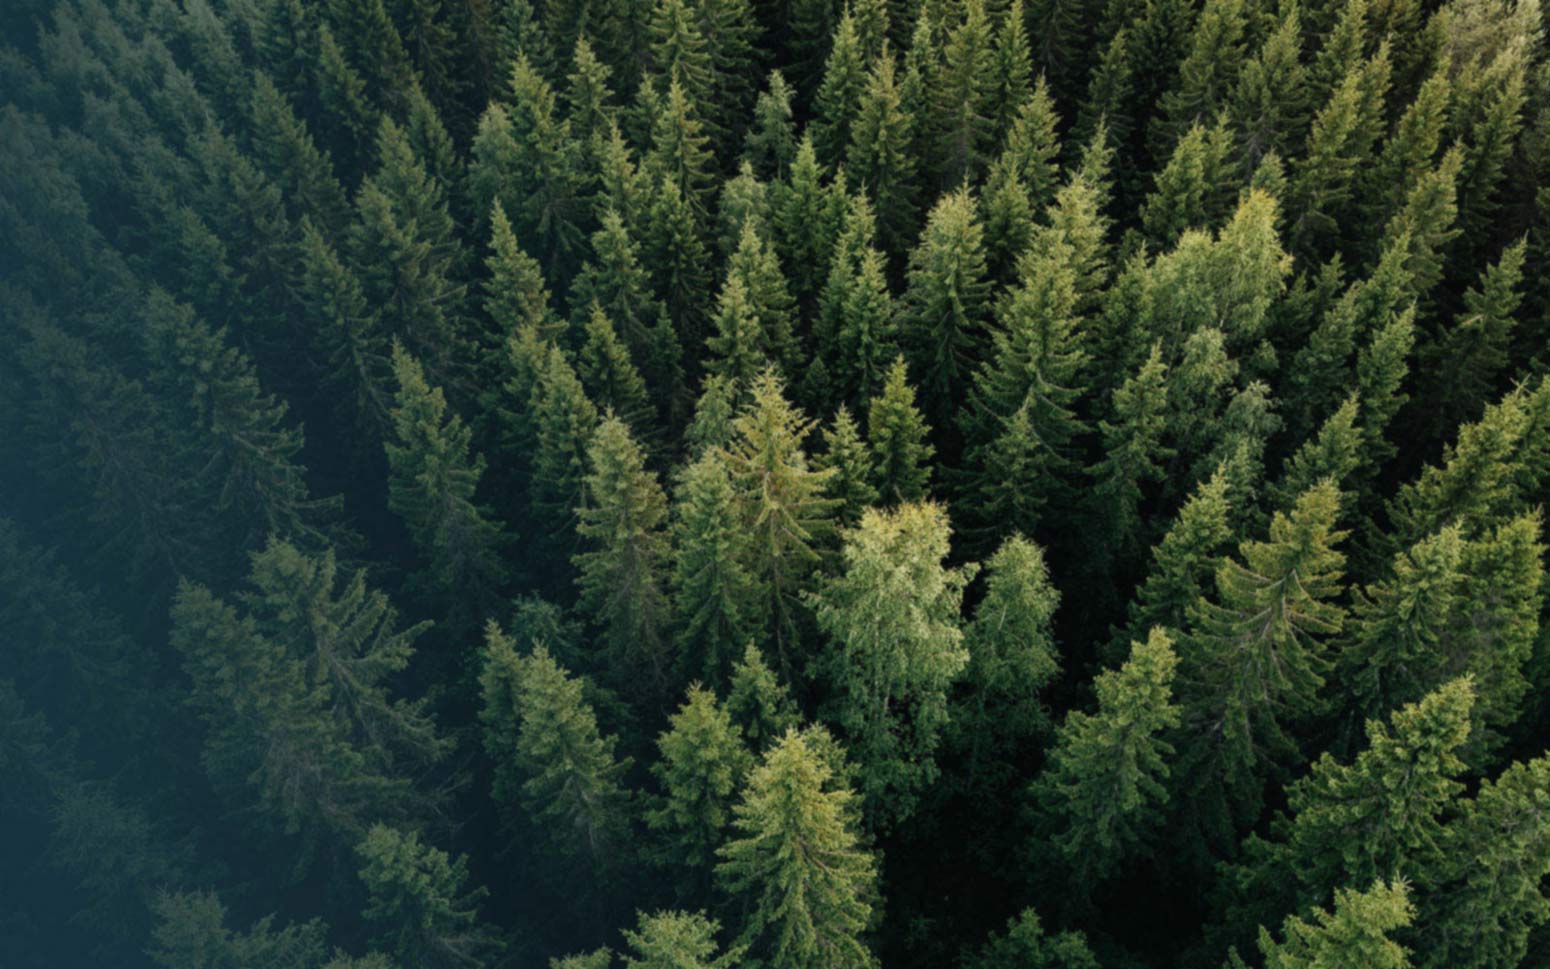 Birds eye view photo of a forest